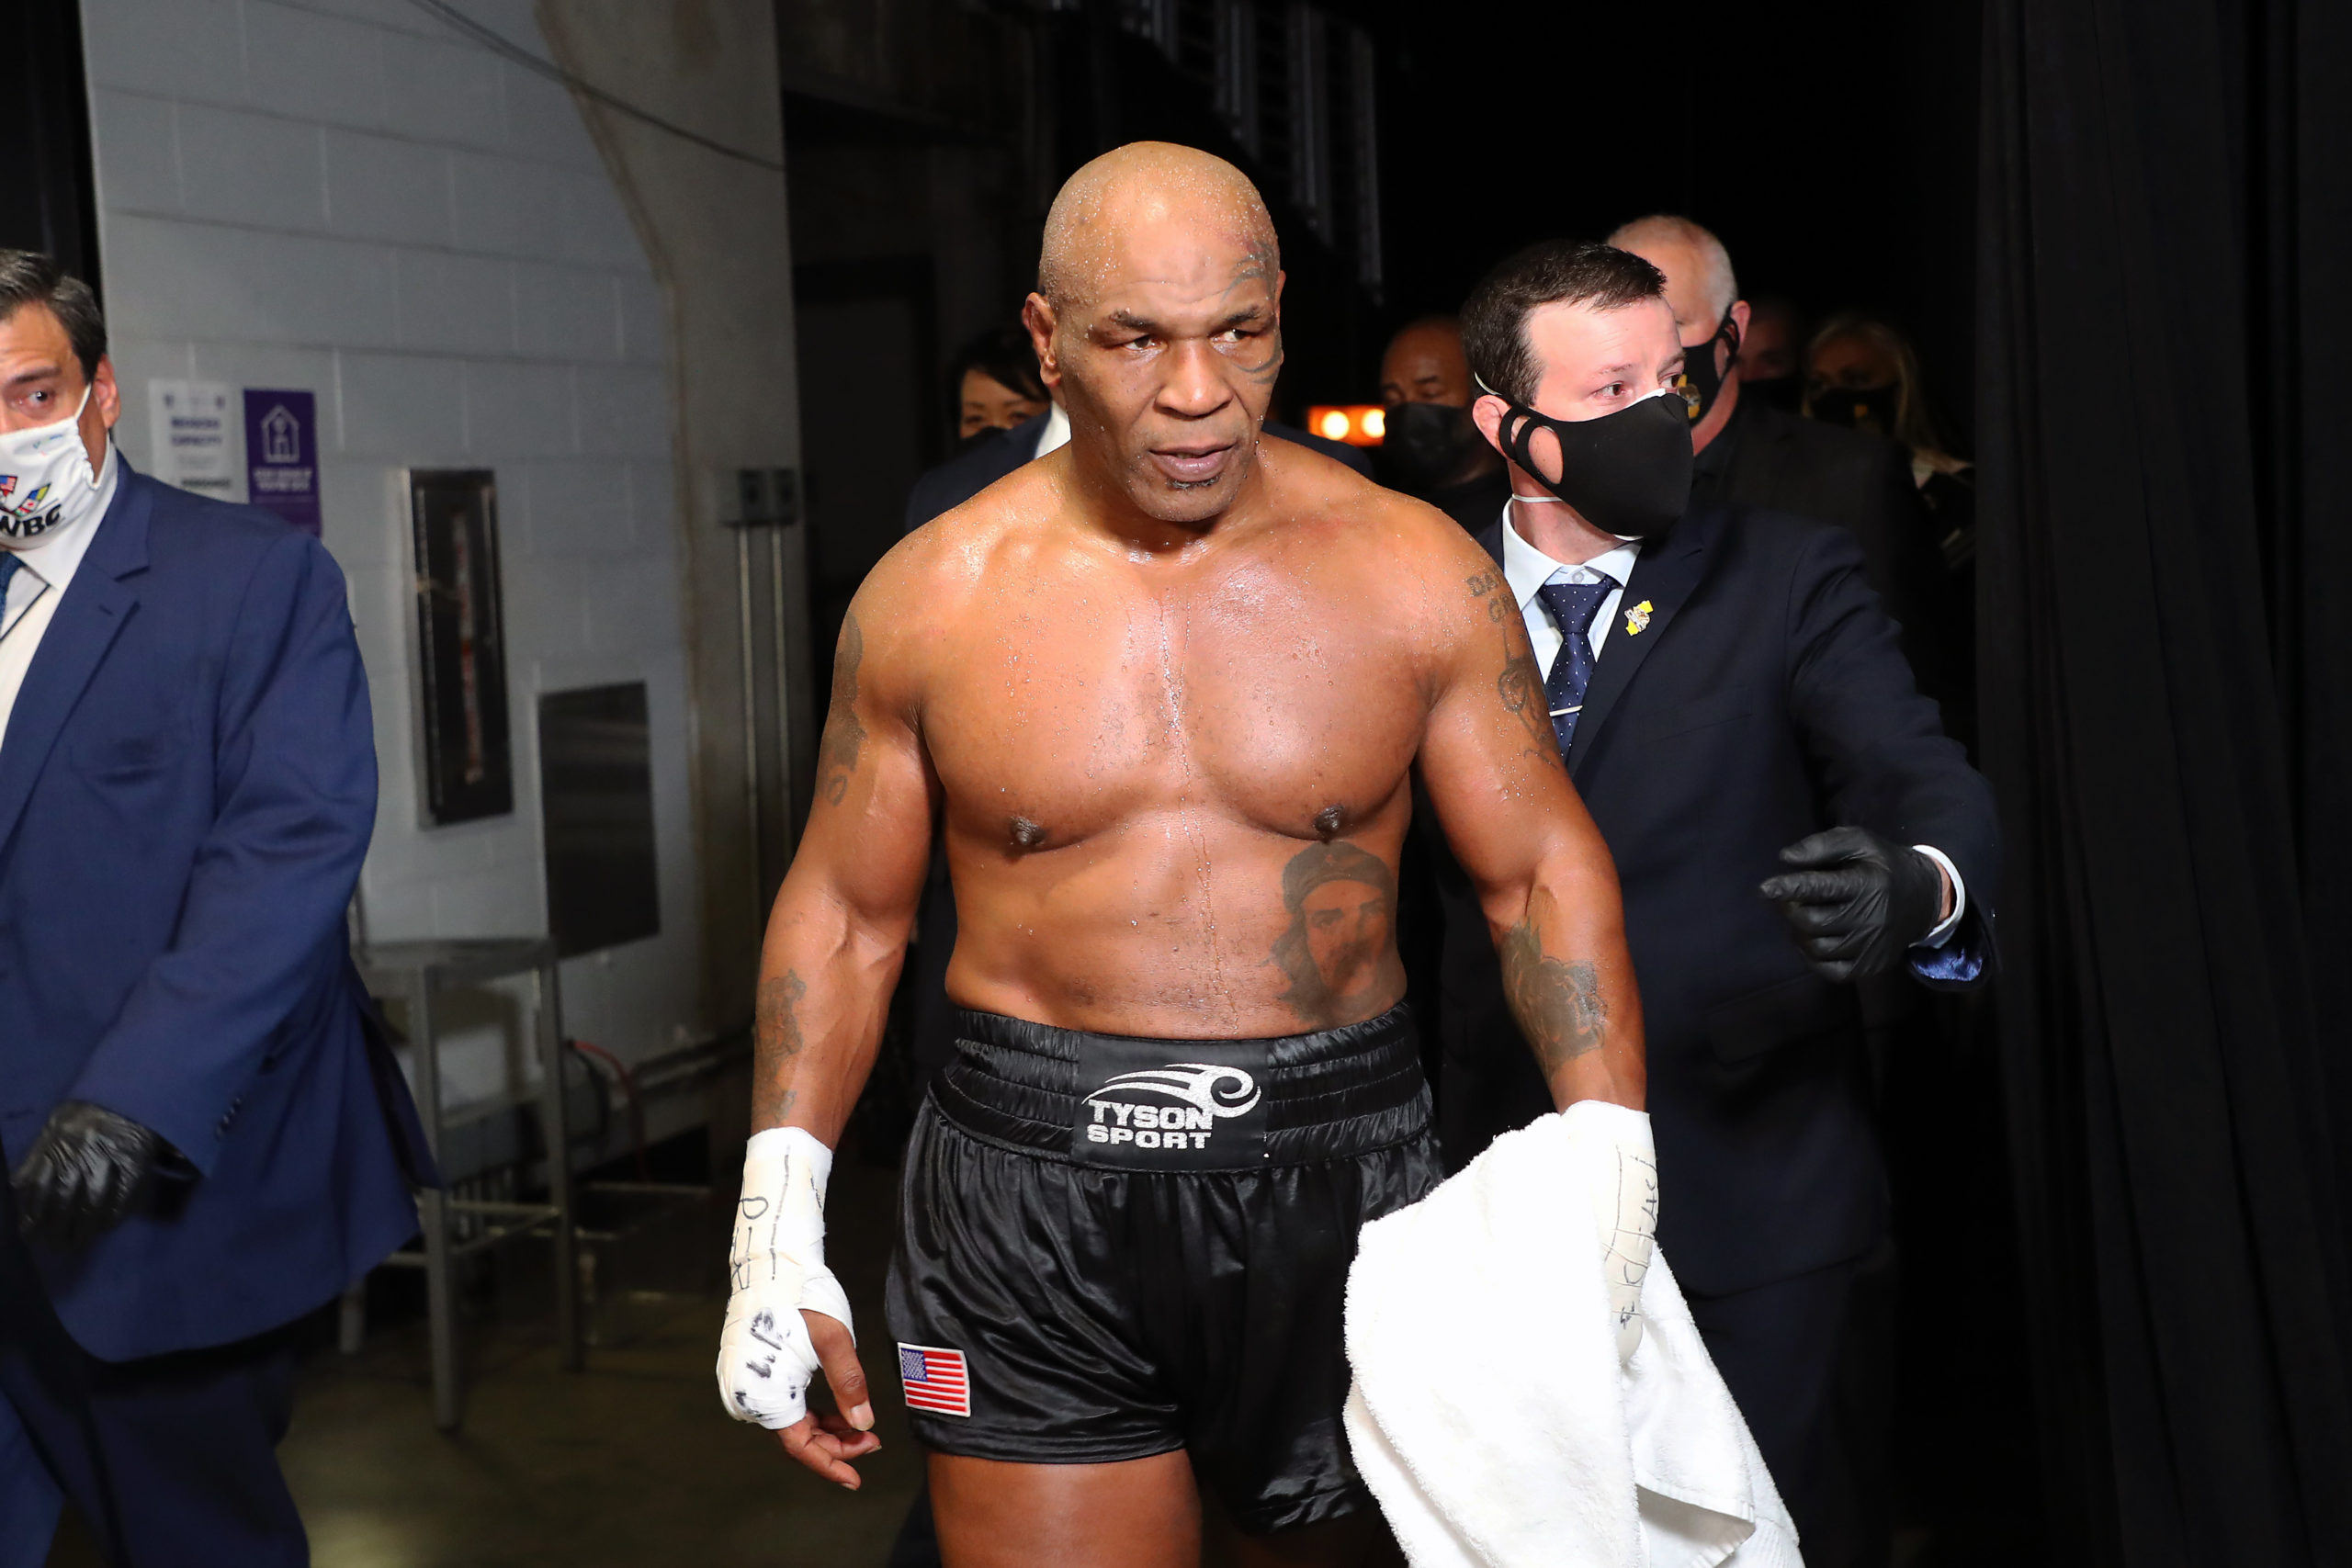 Mike Tyson (black trunks) exits the ring after his split draw against Roy Jones, Jr. (white trunks) during a heavyweight exhibition boxing bout for the WBC Frontline Belt at the Staples Center. Mandatory Credit: Joe Scarnici/Handout Photo via USA TODAY Sports